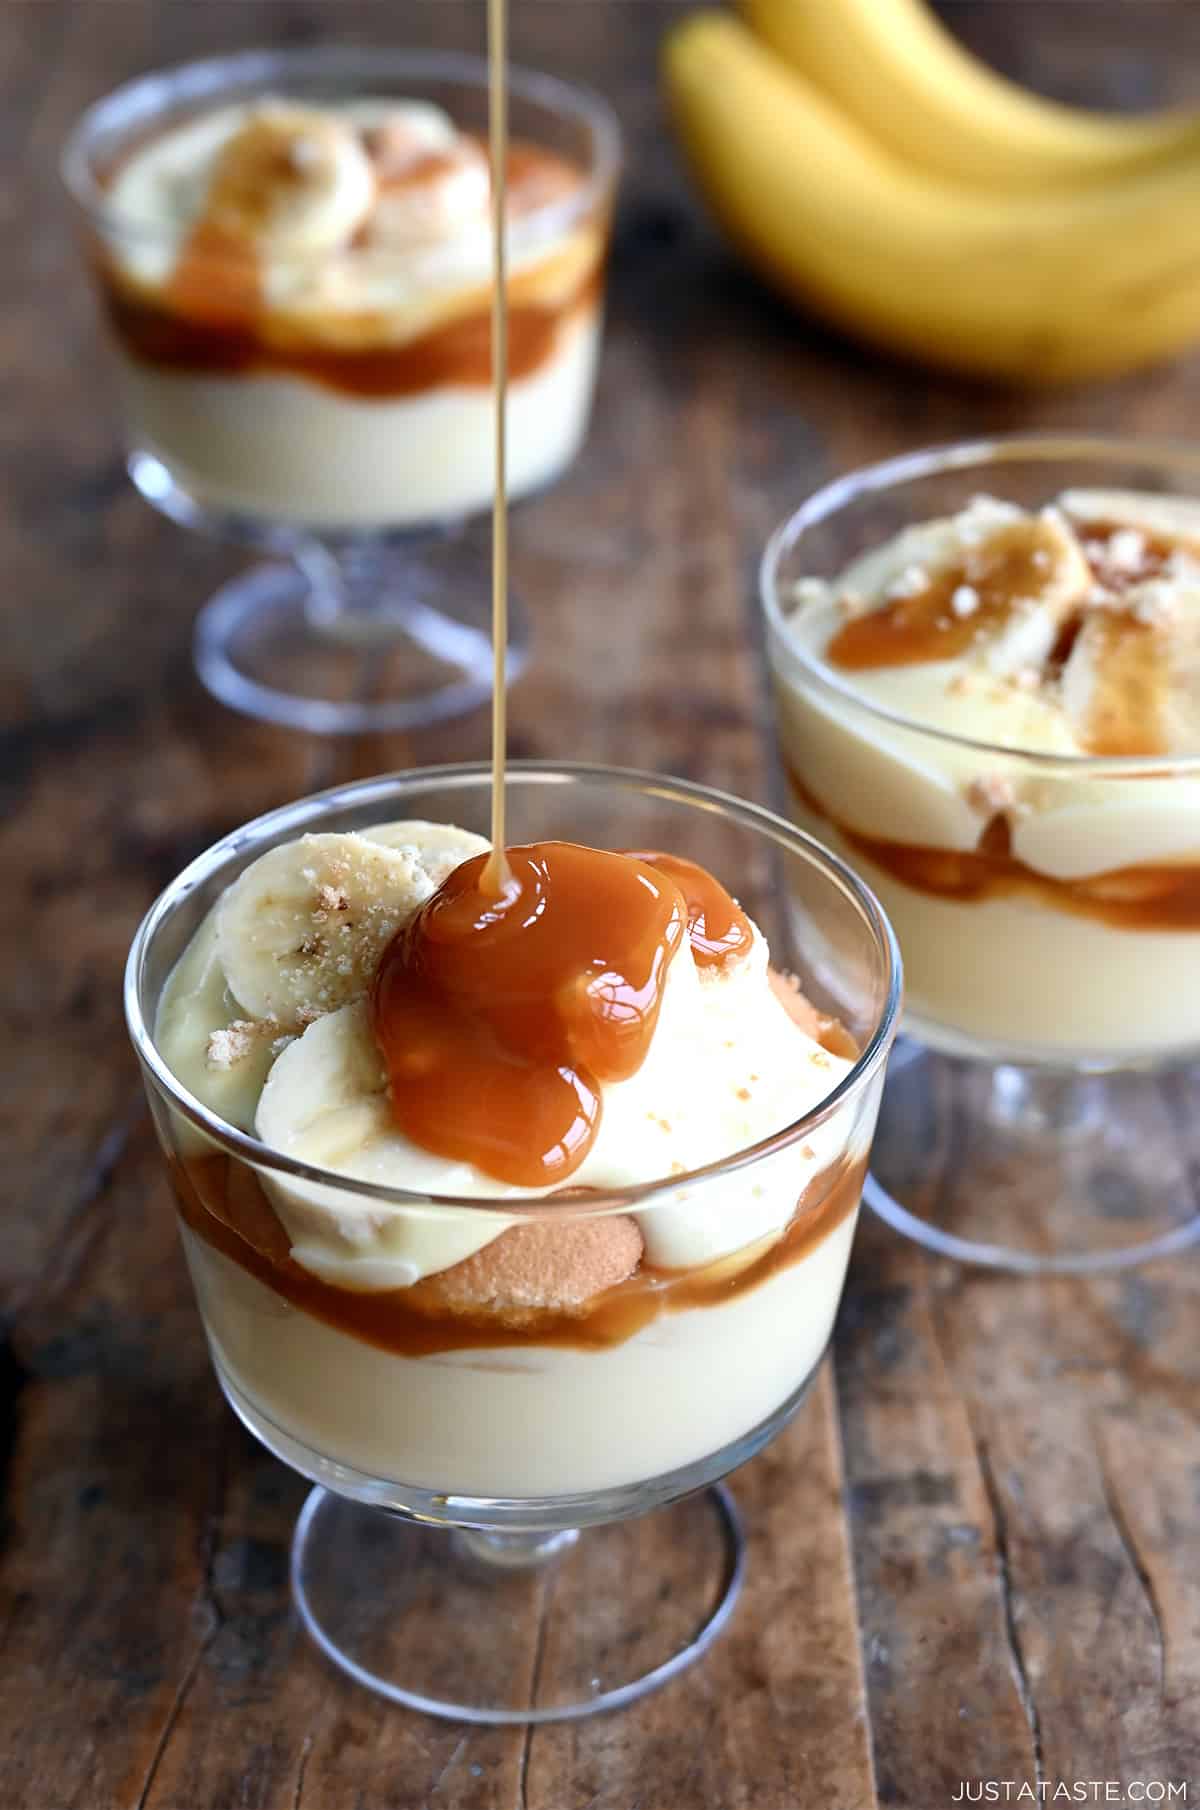 Salted caramel sauce being drizzled atop sliced bananas in a parfait glass with layers of banana pudding and vanilla wafers.